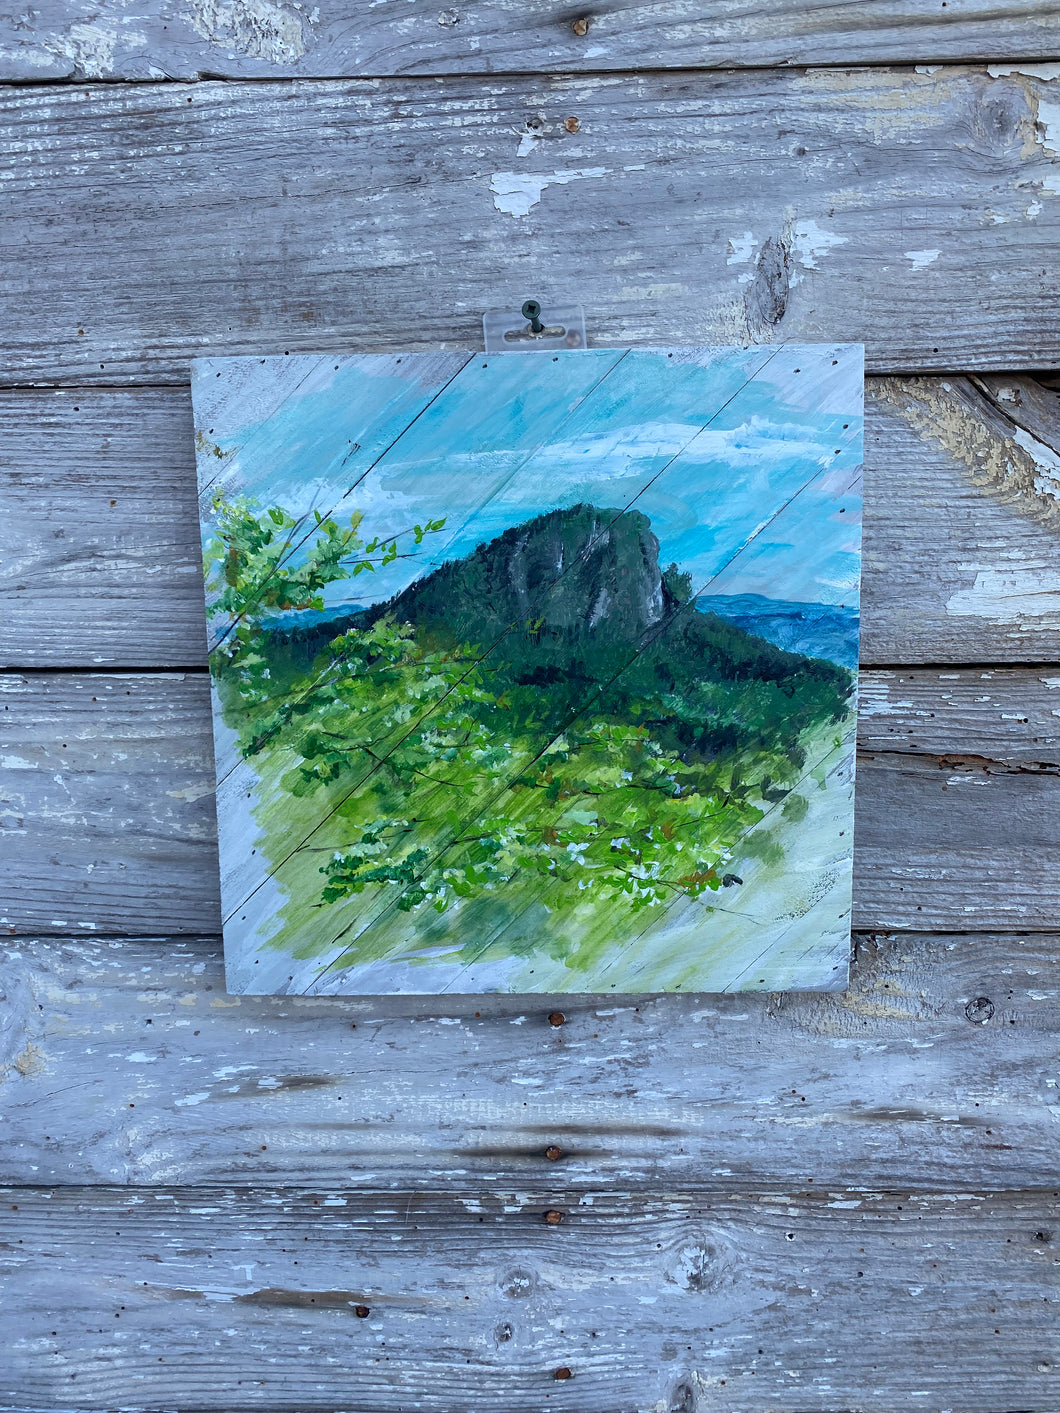 Table Rock, NC - Hand-painted Wooden Square Pallet Wood Wall Decor